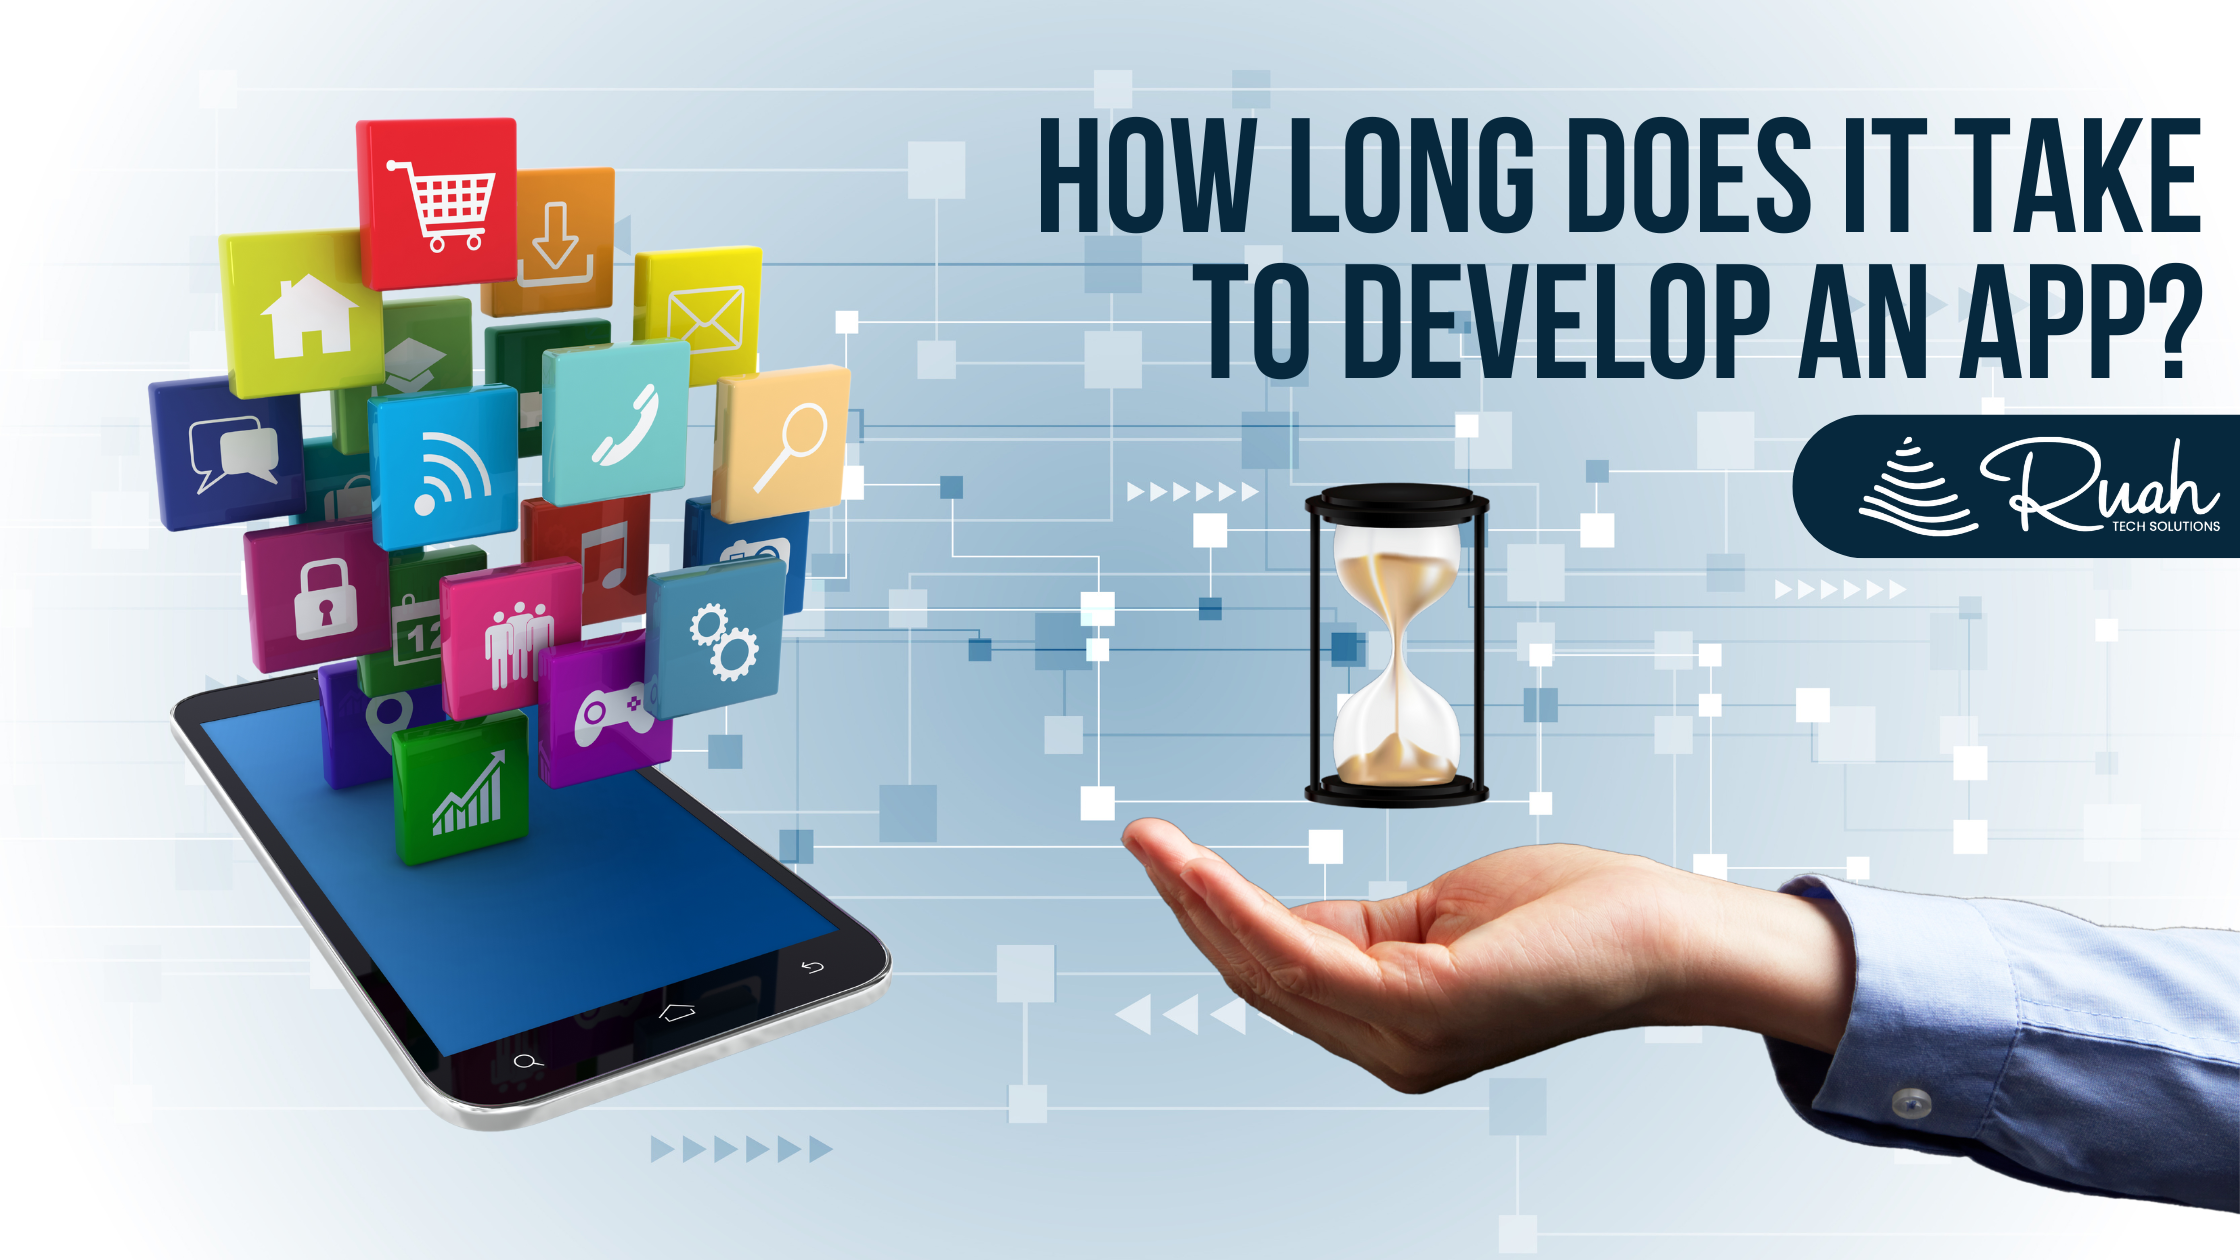 How long does it take to develop an app blog